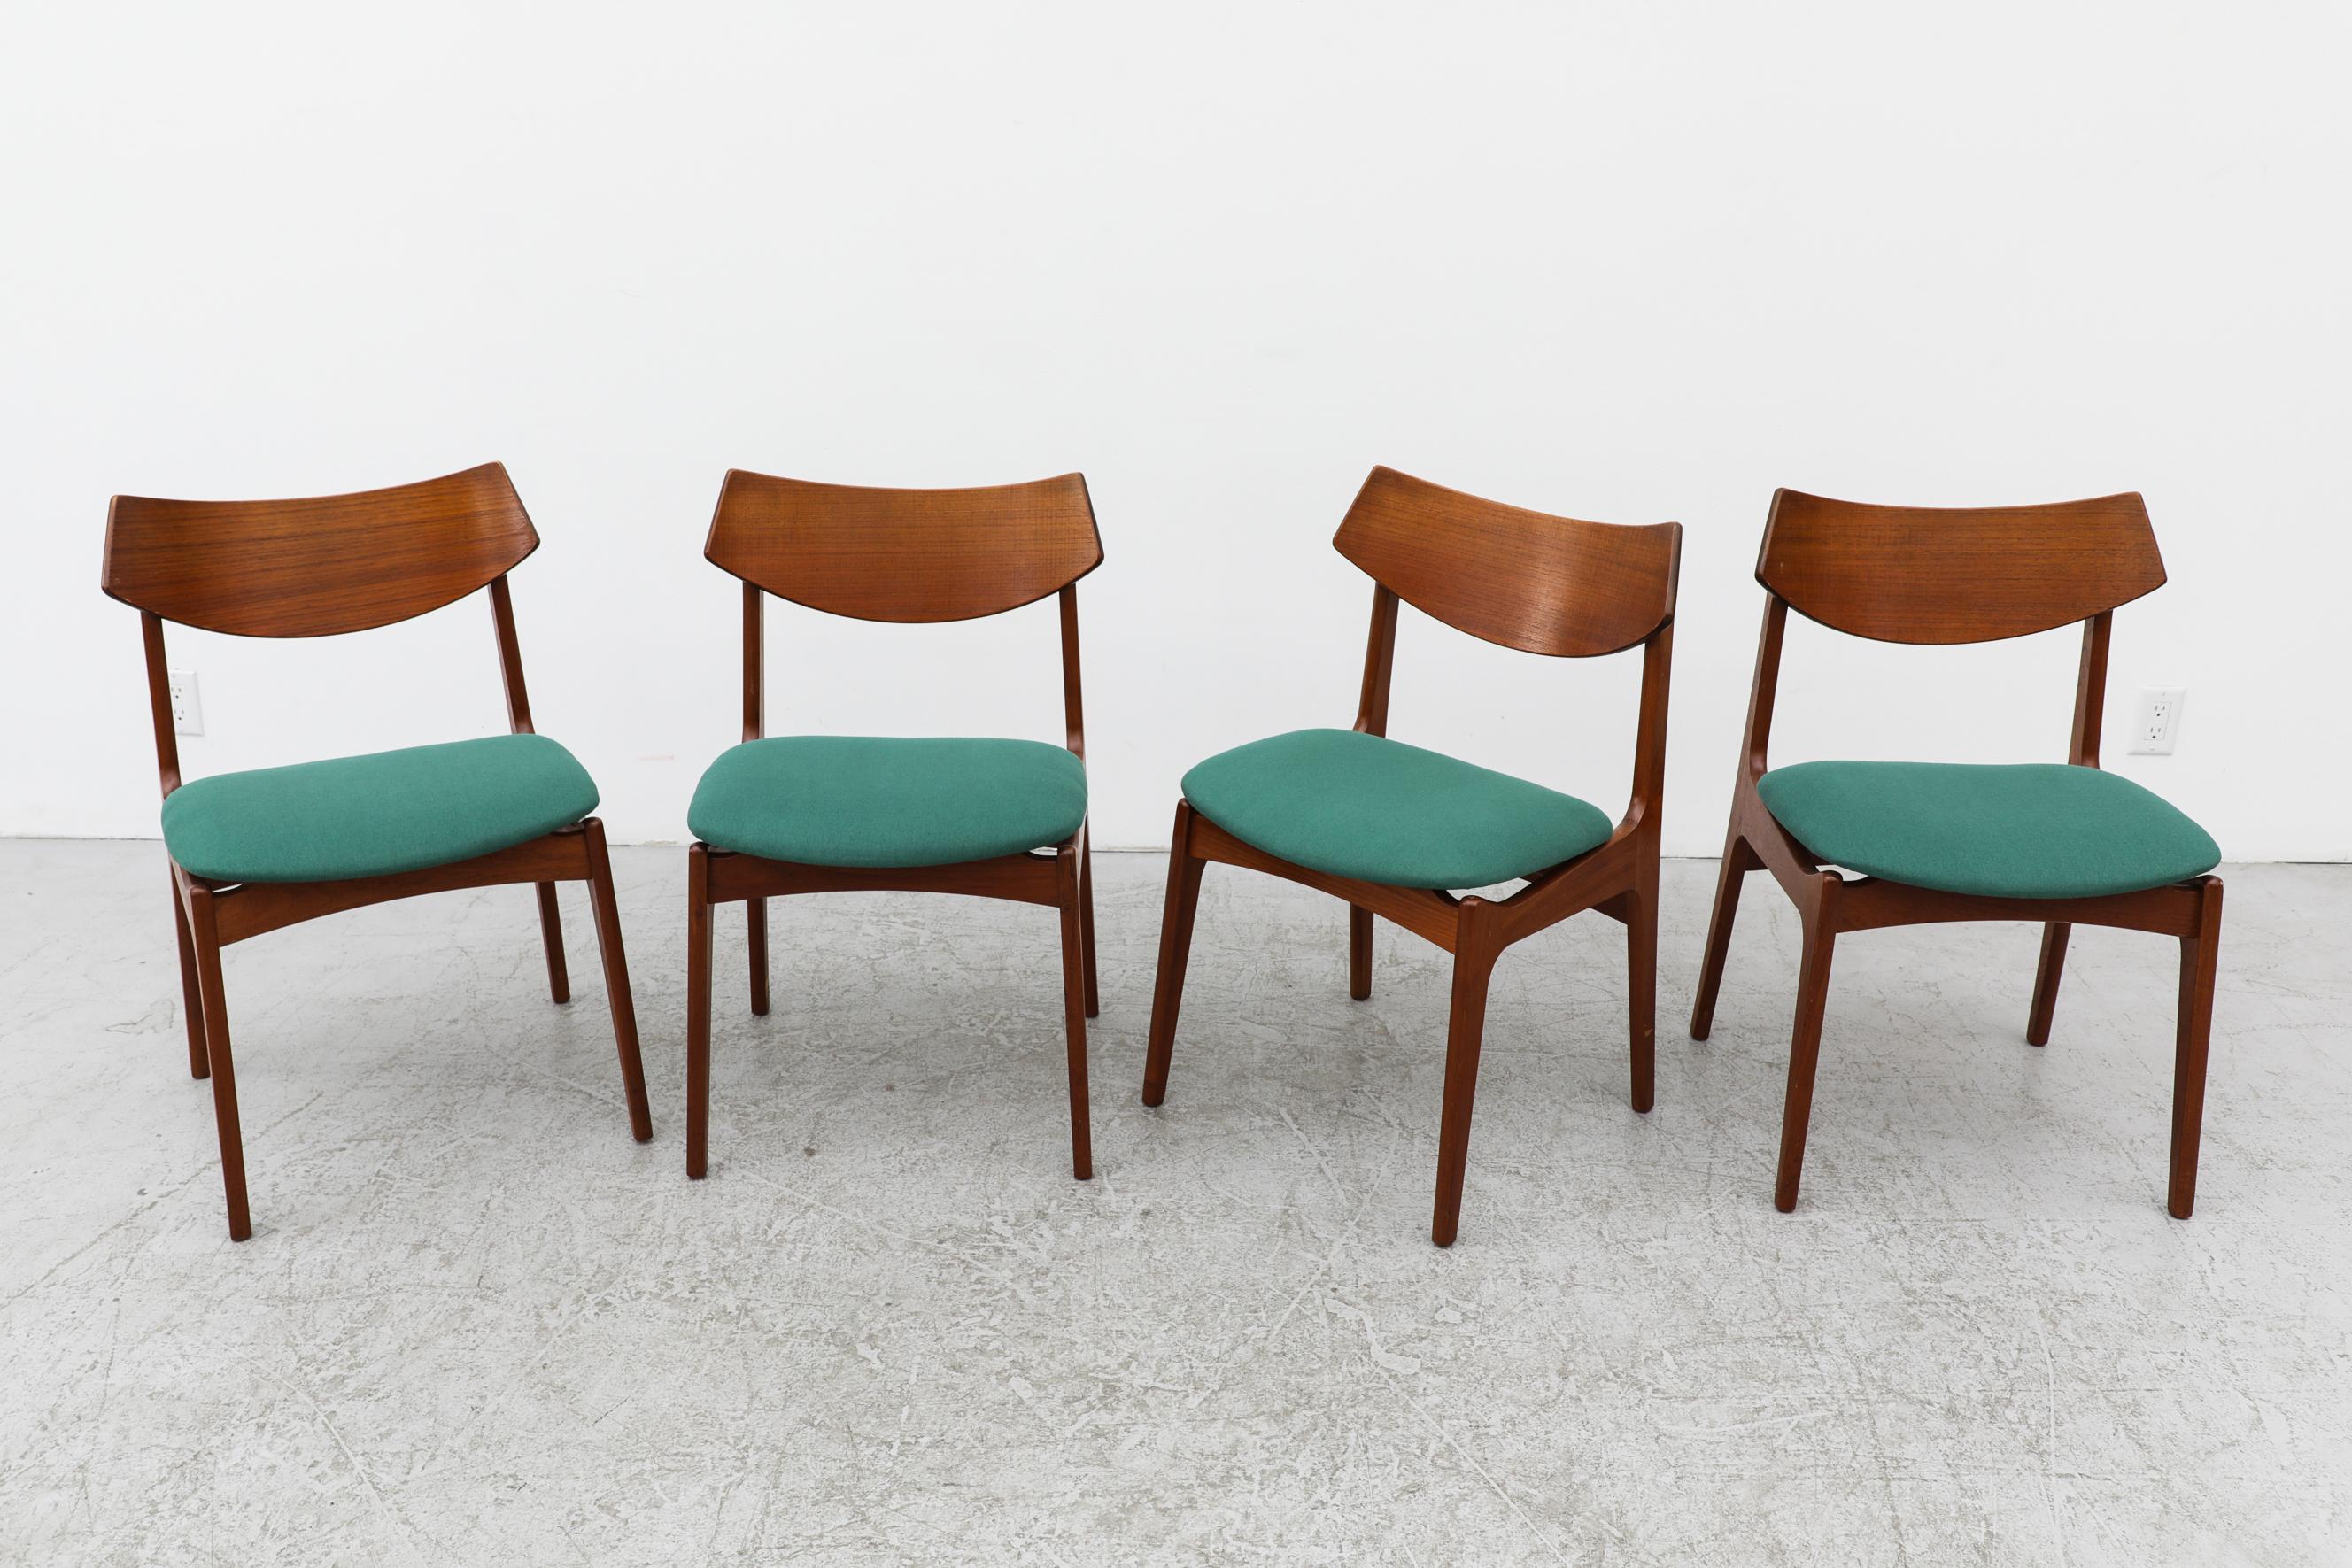 Set of 4 Danish Teak Dining Chairs by Funder Schmidt + Madsen w/ Teal Seats 1